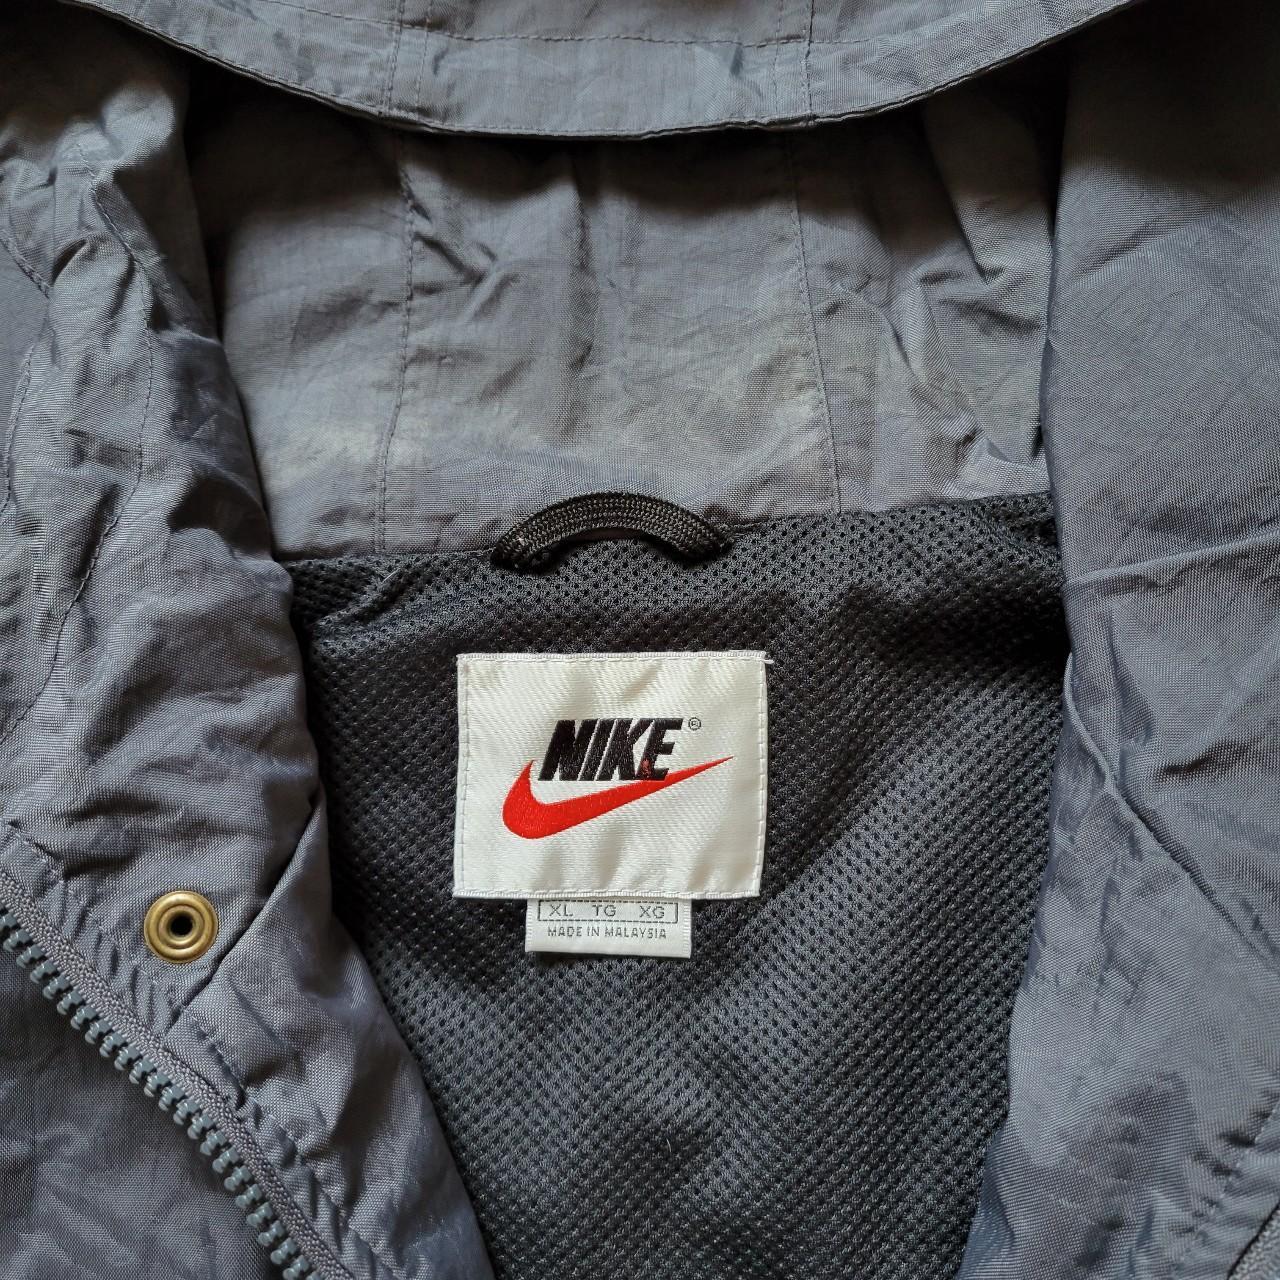 Product Image 2 - vtg 90s NIKE monochrome embroidered